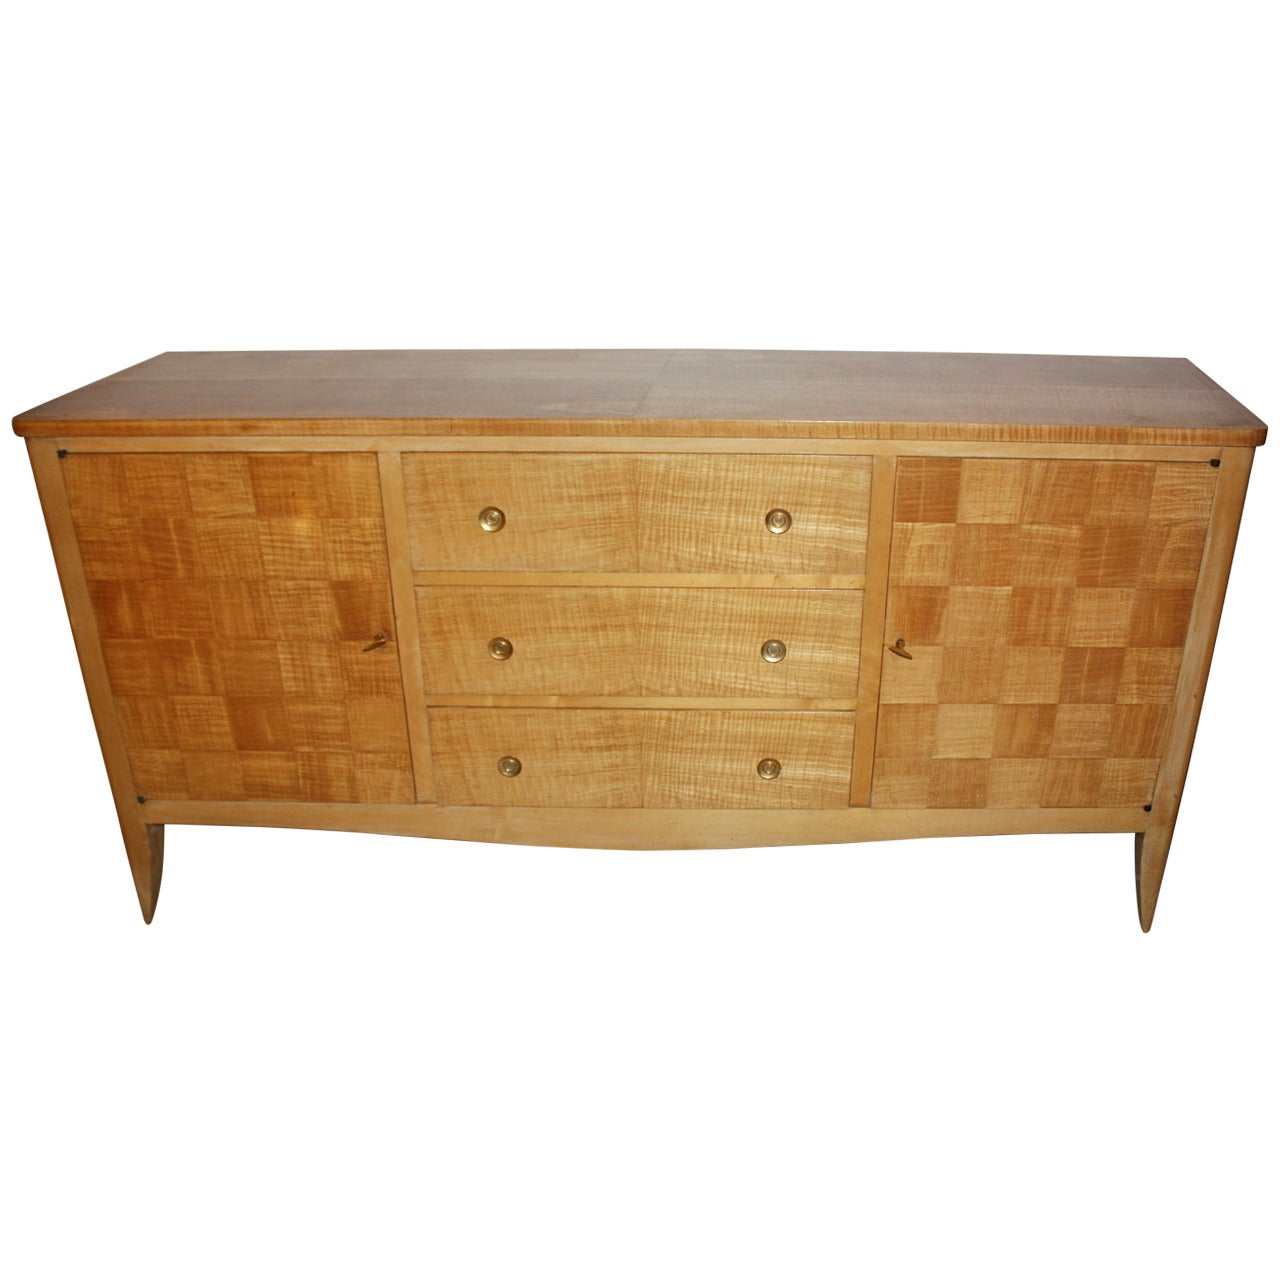 Andre Arbus Style Sideboard in Sycamore, circa 1940